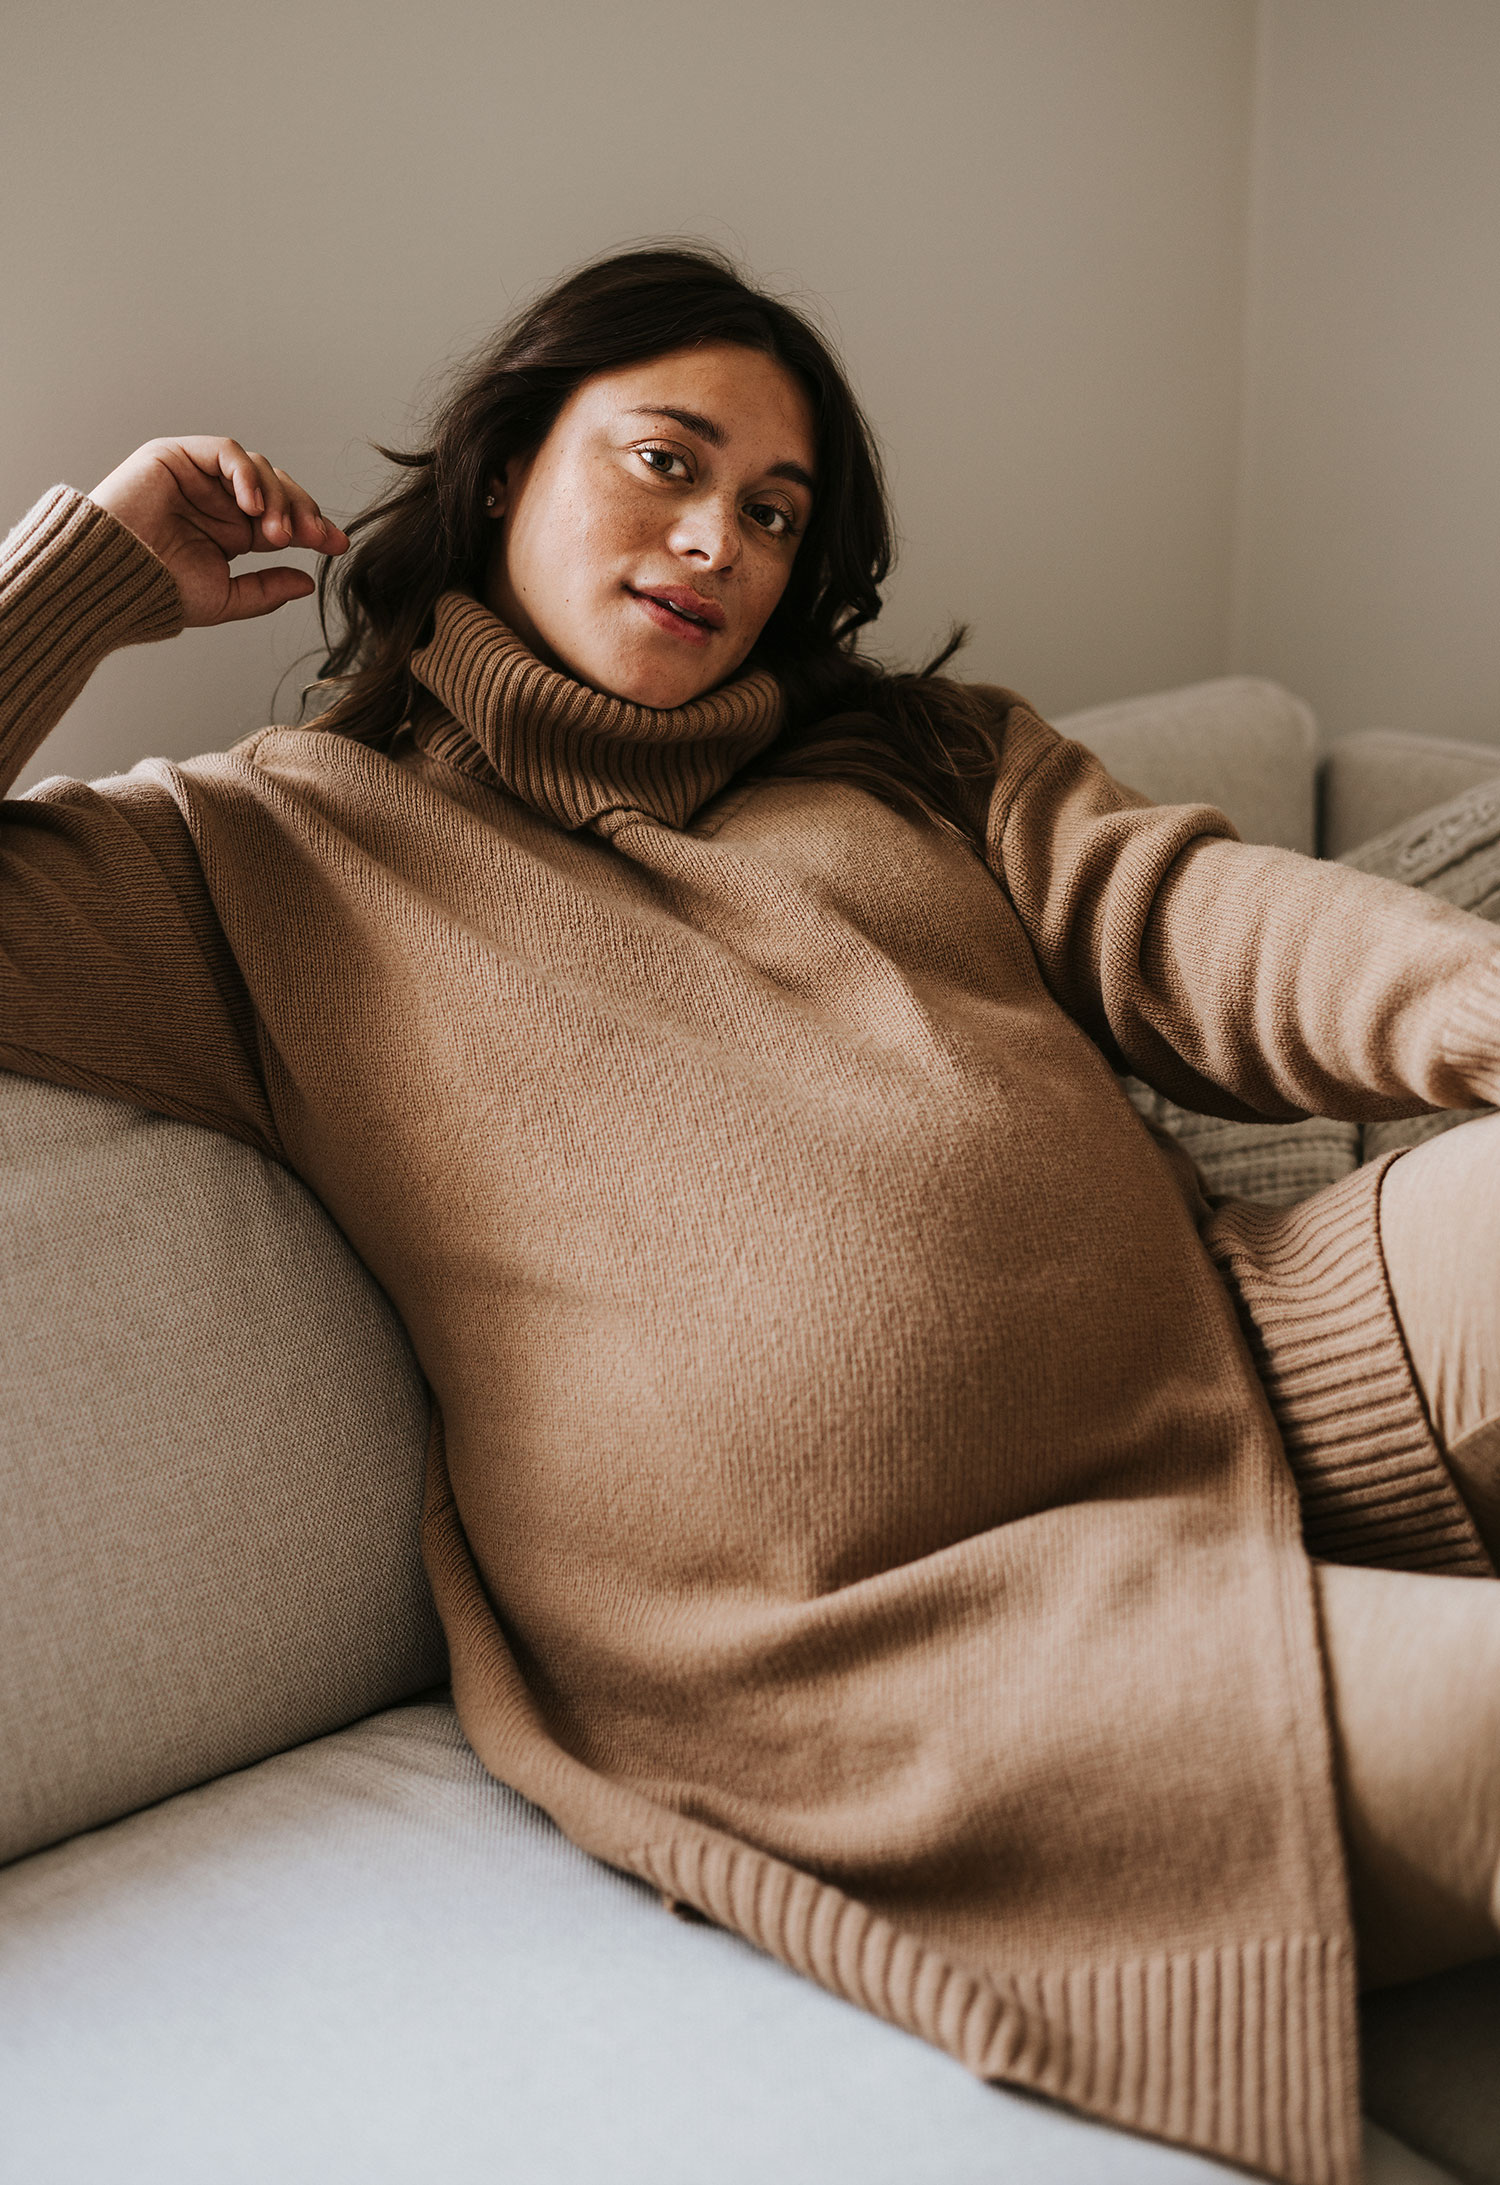 Oversized wool sweater with nursing access, Maternity top / Nursing top